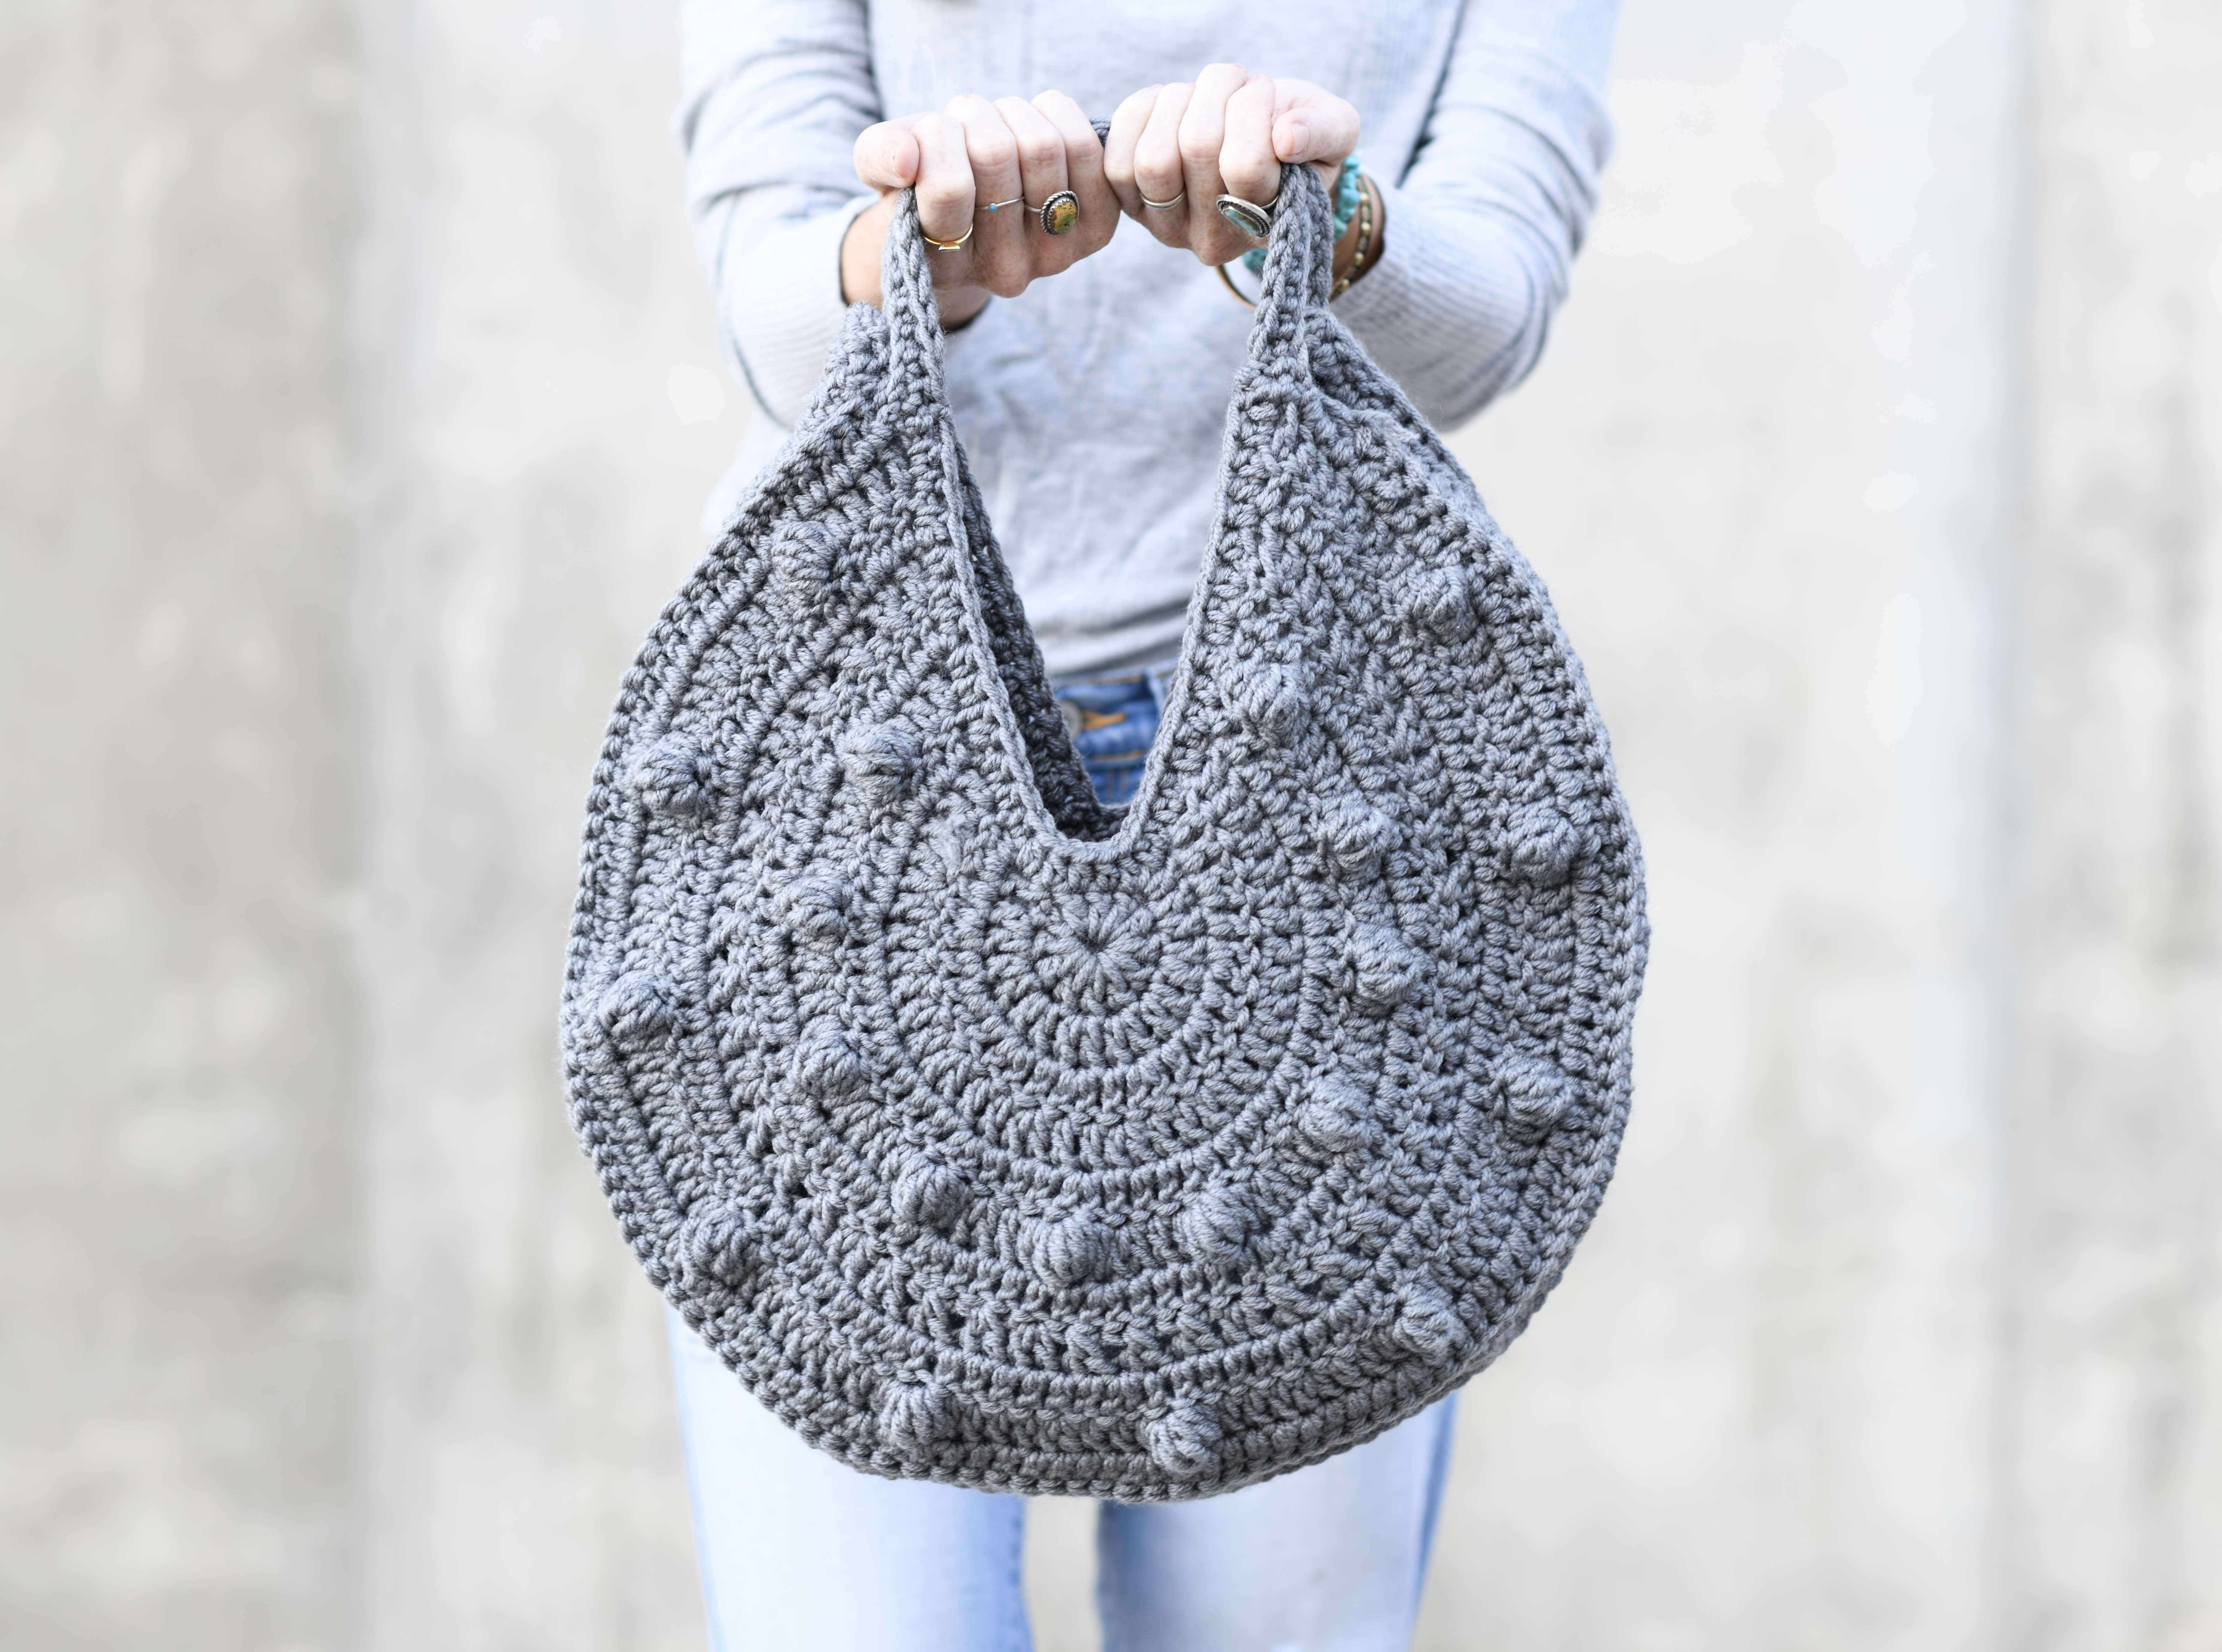 Free Crochet Purse Pattern - The Bobblelicious Bag - The Loopy Lamb